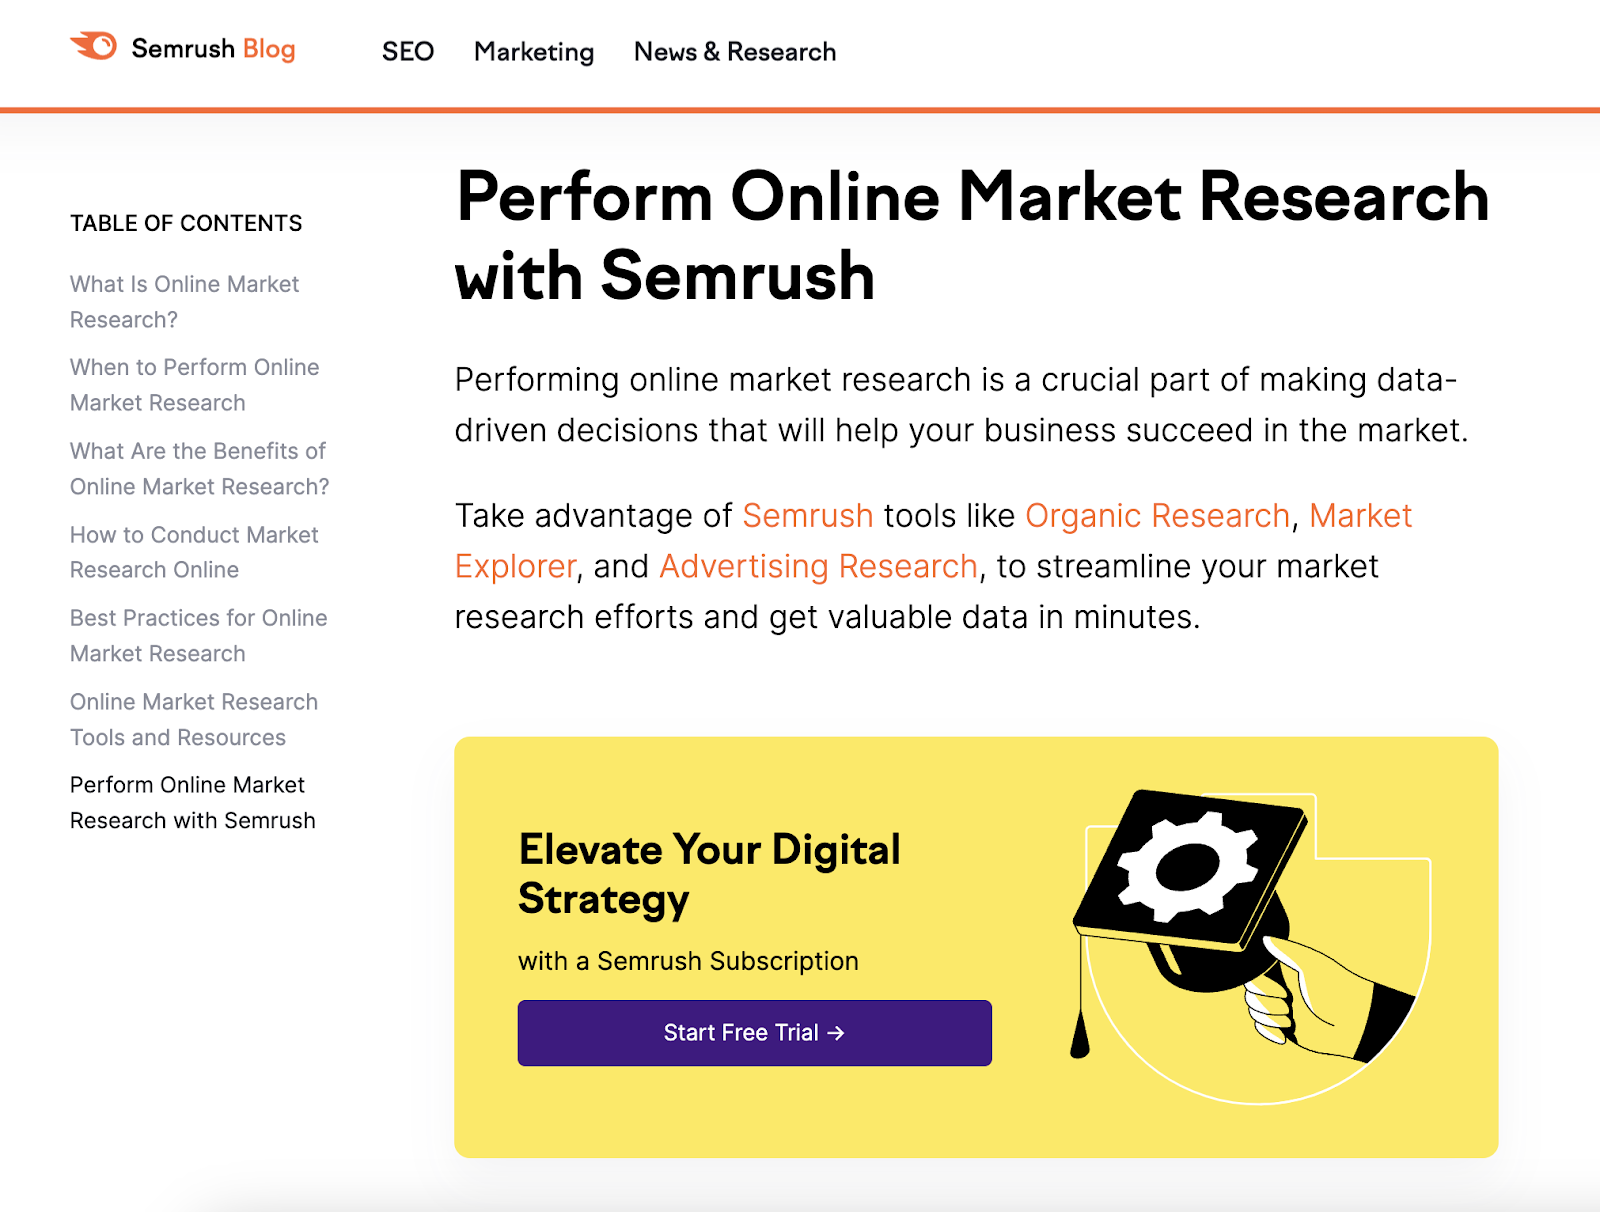 A conclusion of Semrush's article on online market research